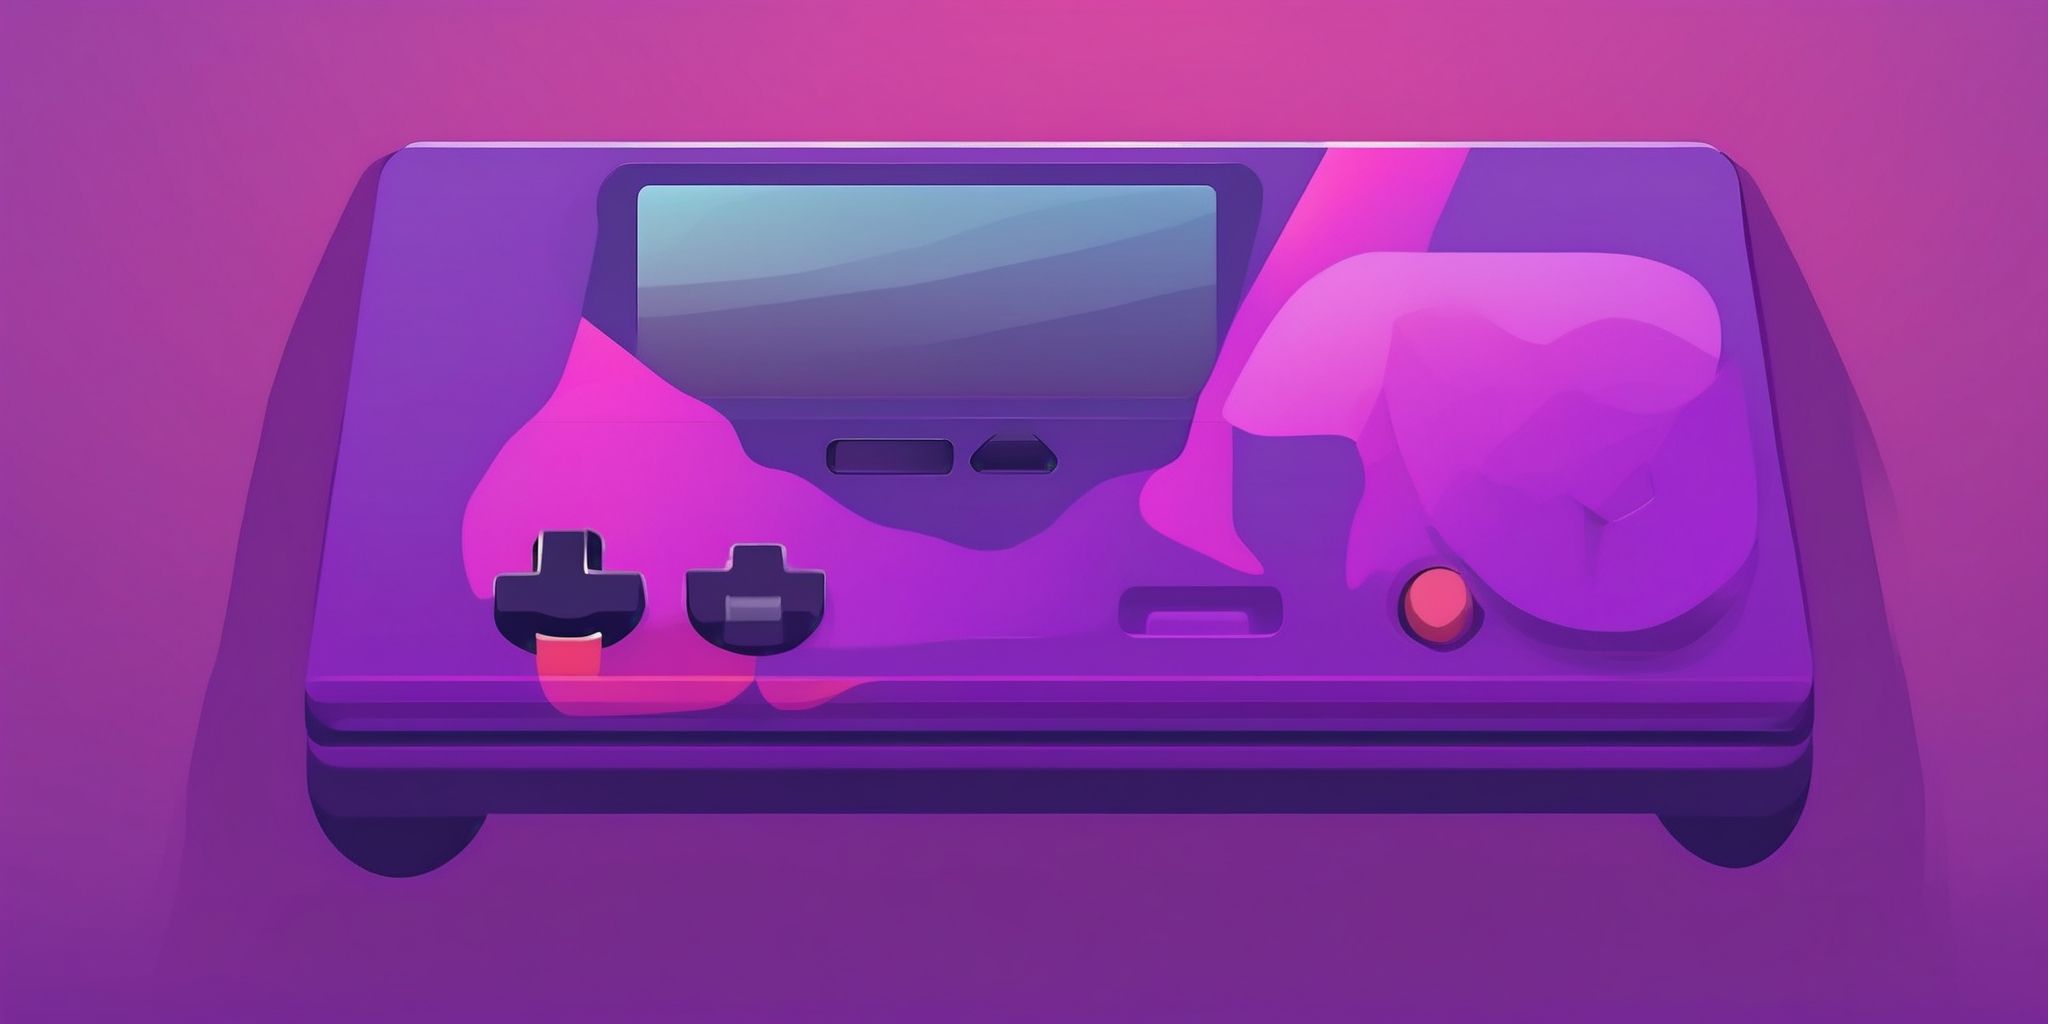 Game console in flat illustration style, colorful purple gradient colors